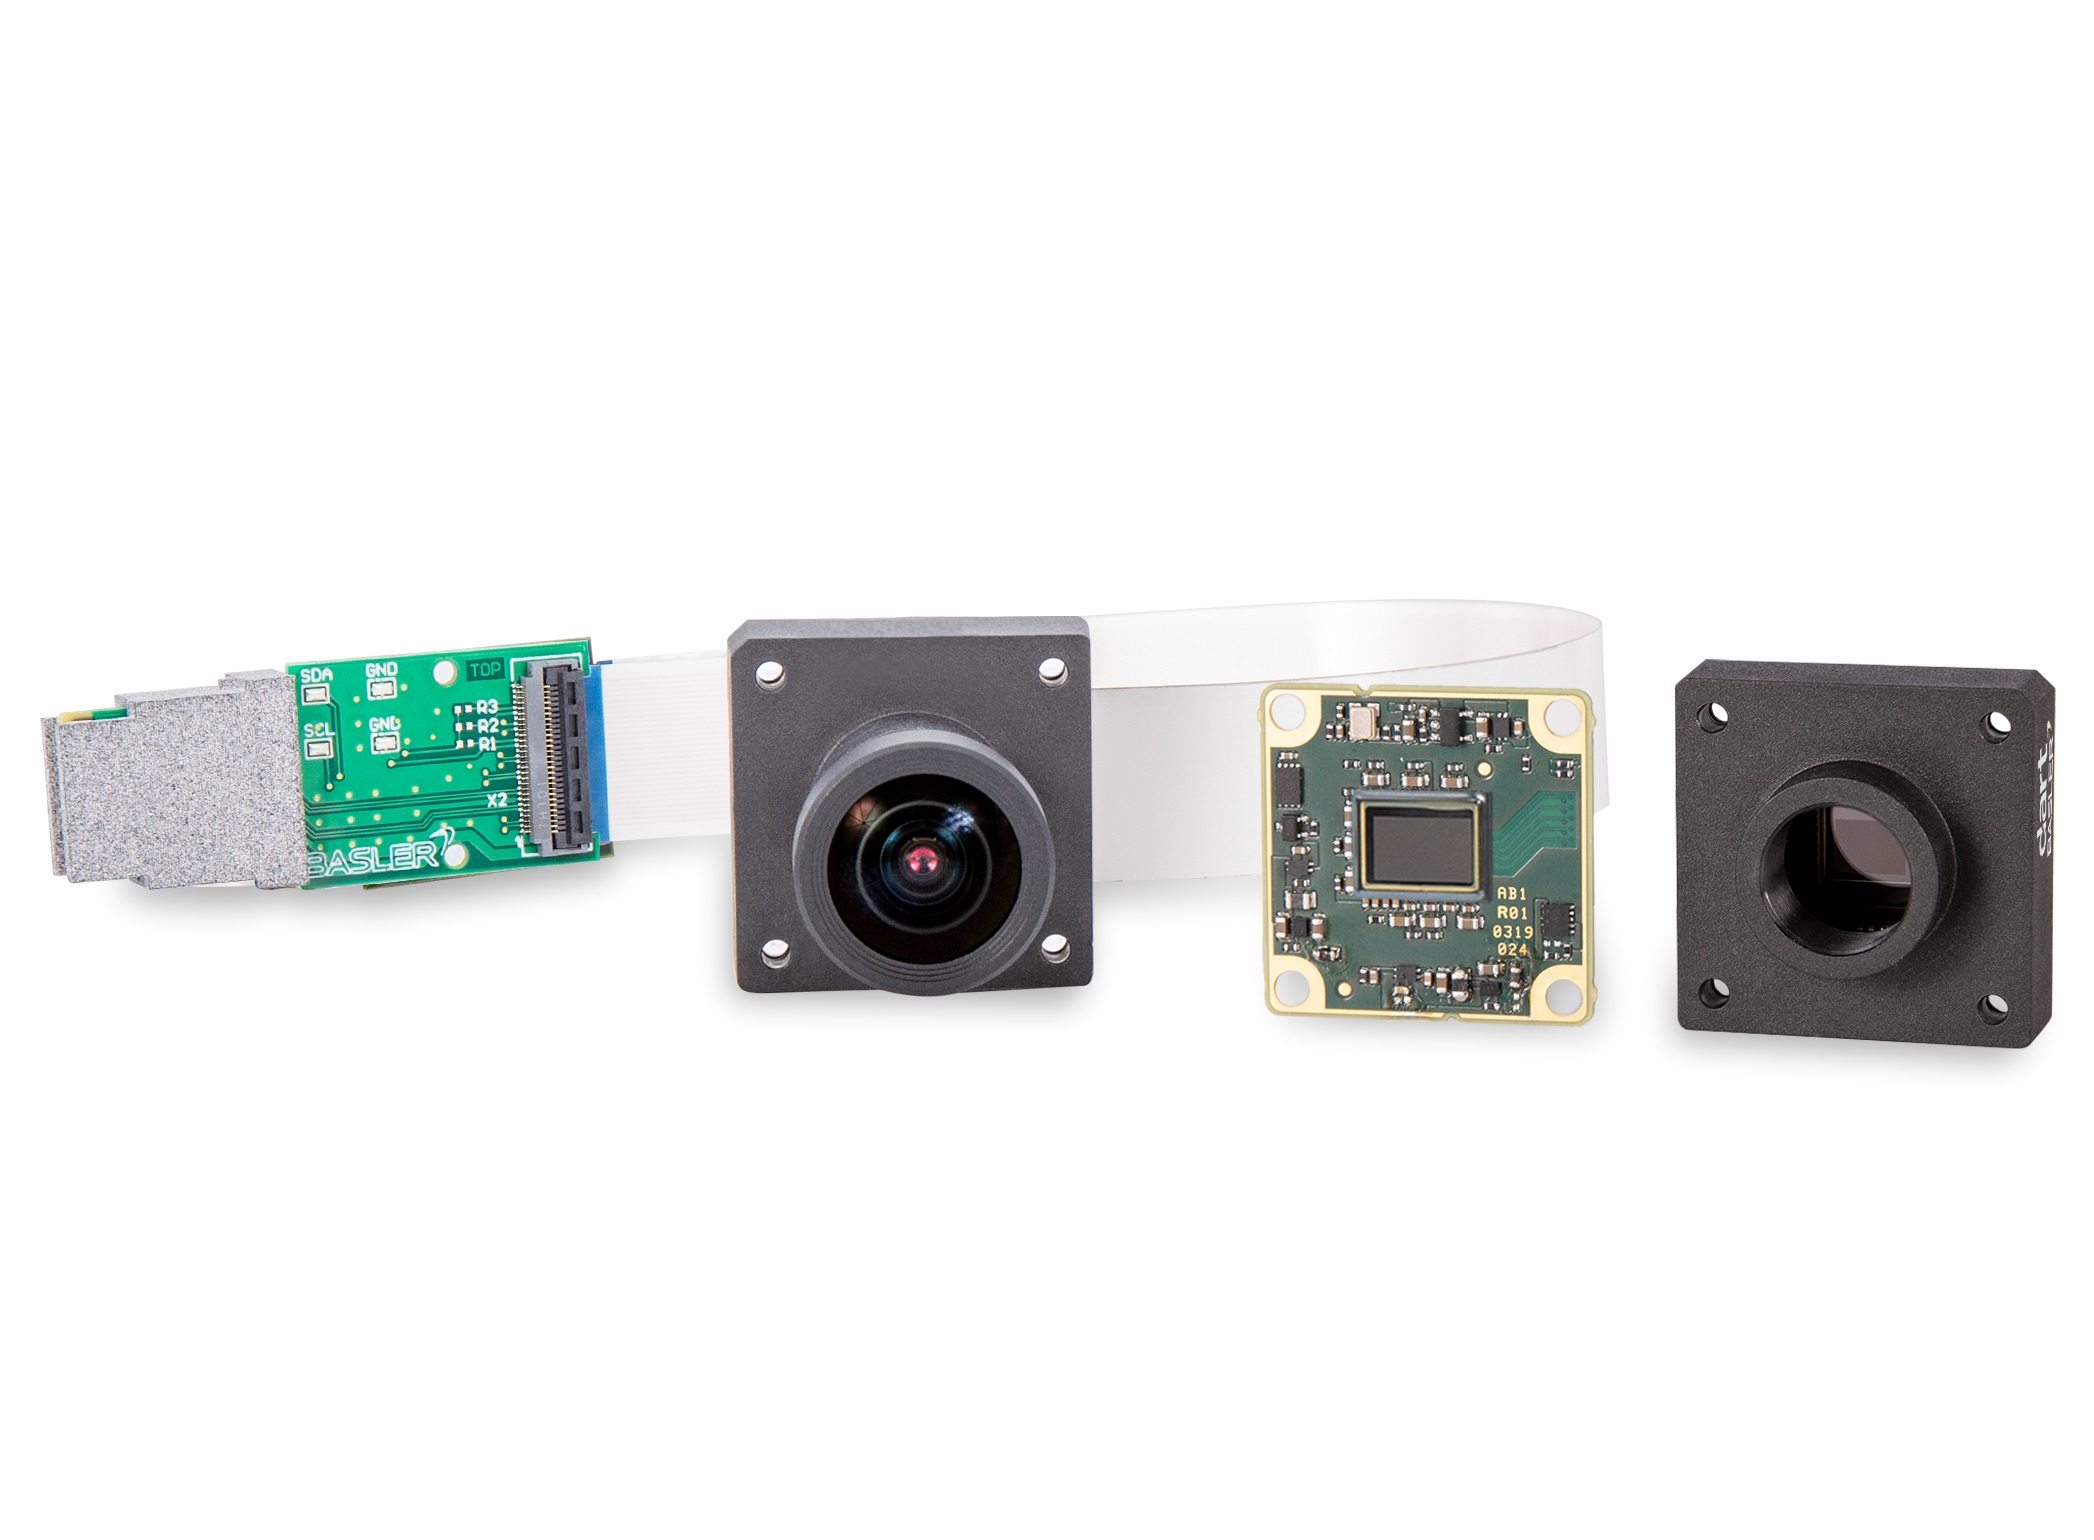 New Basler 8 MP dart BCON for MIPI camera module and Add-On Kit for NXP’s i.MX 8M Plus applications processor